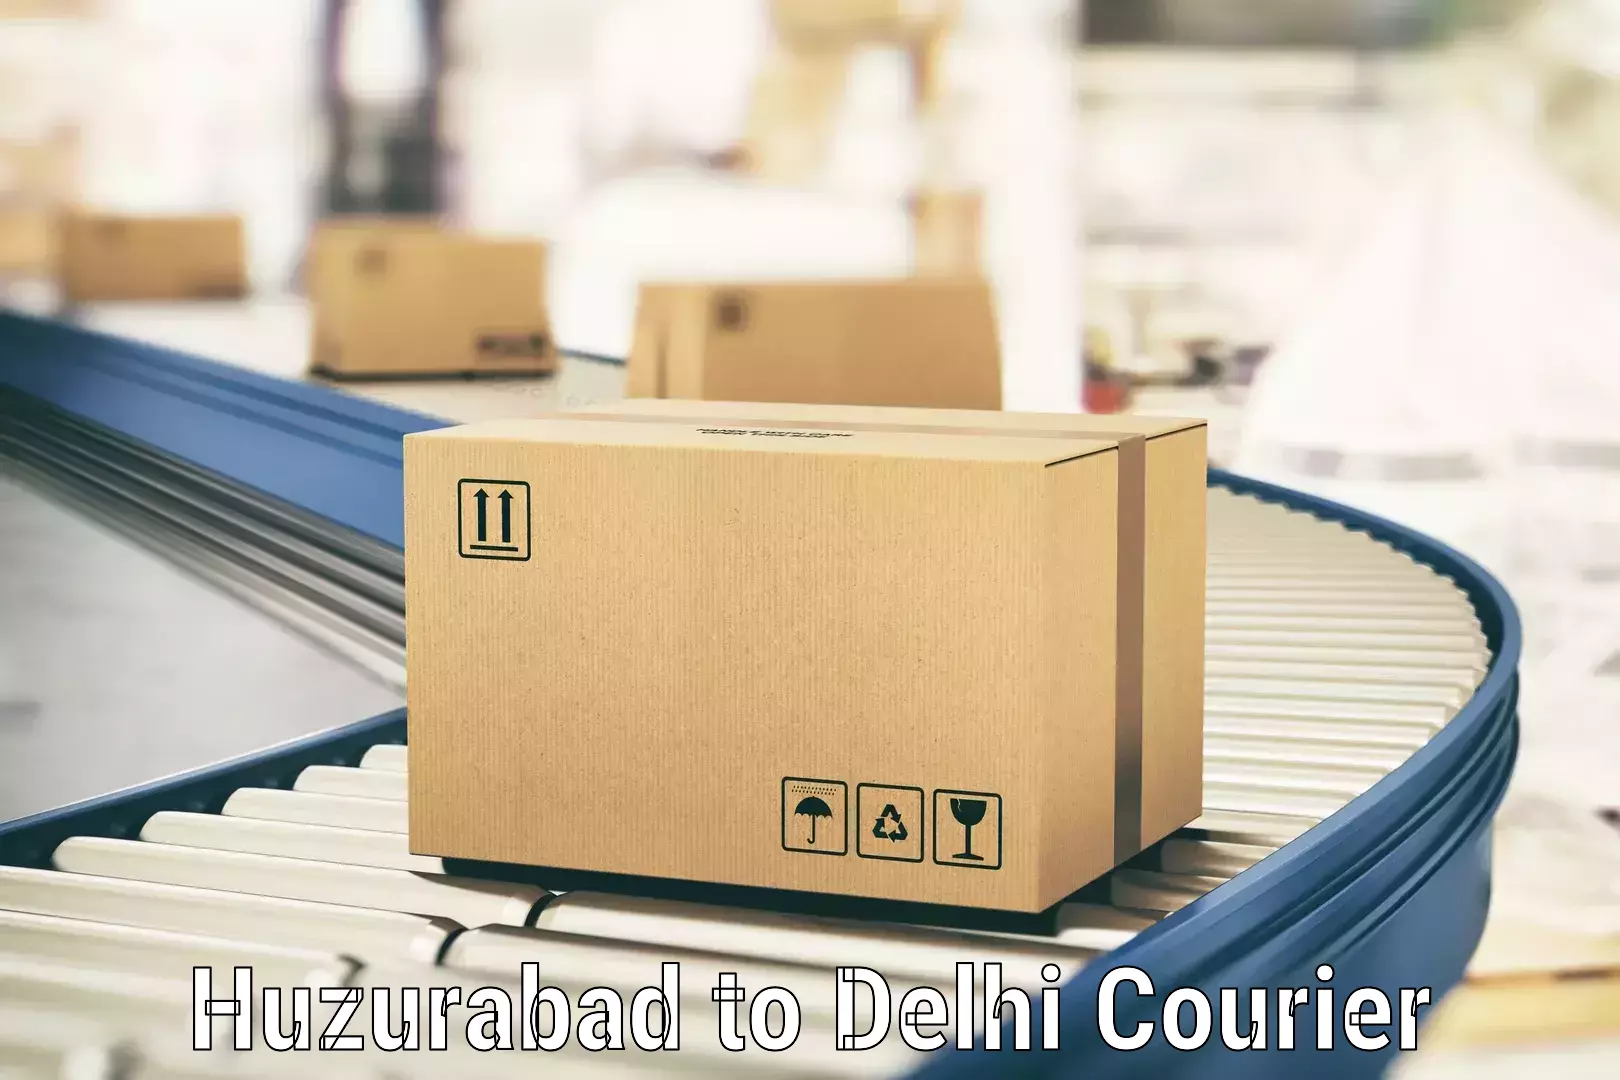 Parcel handling and care in Huzurabad to NCR